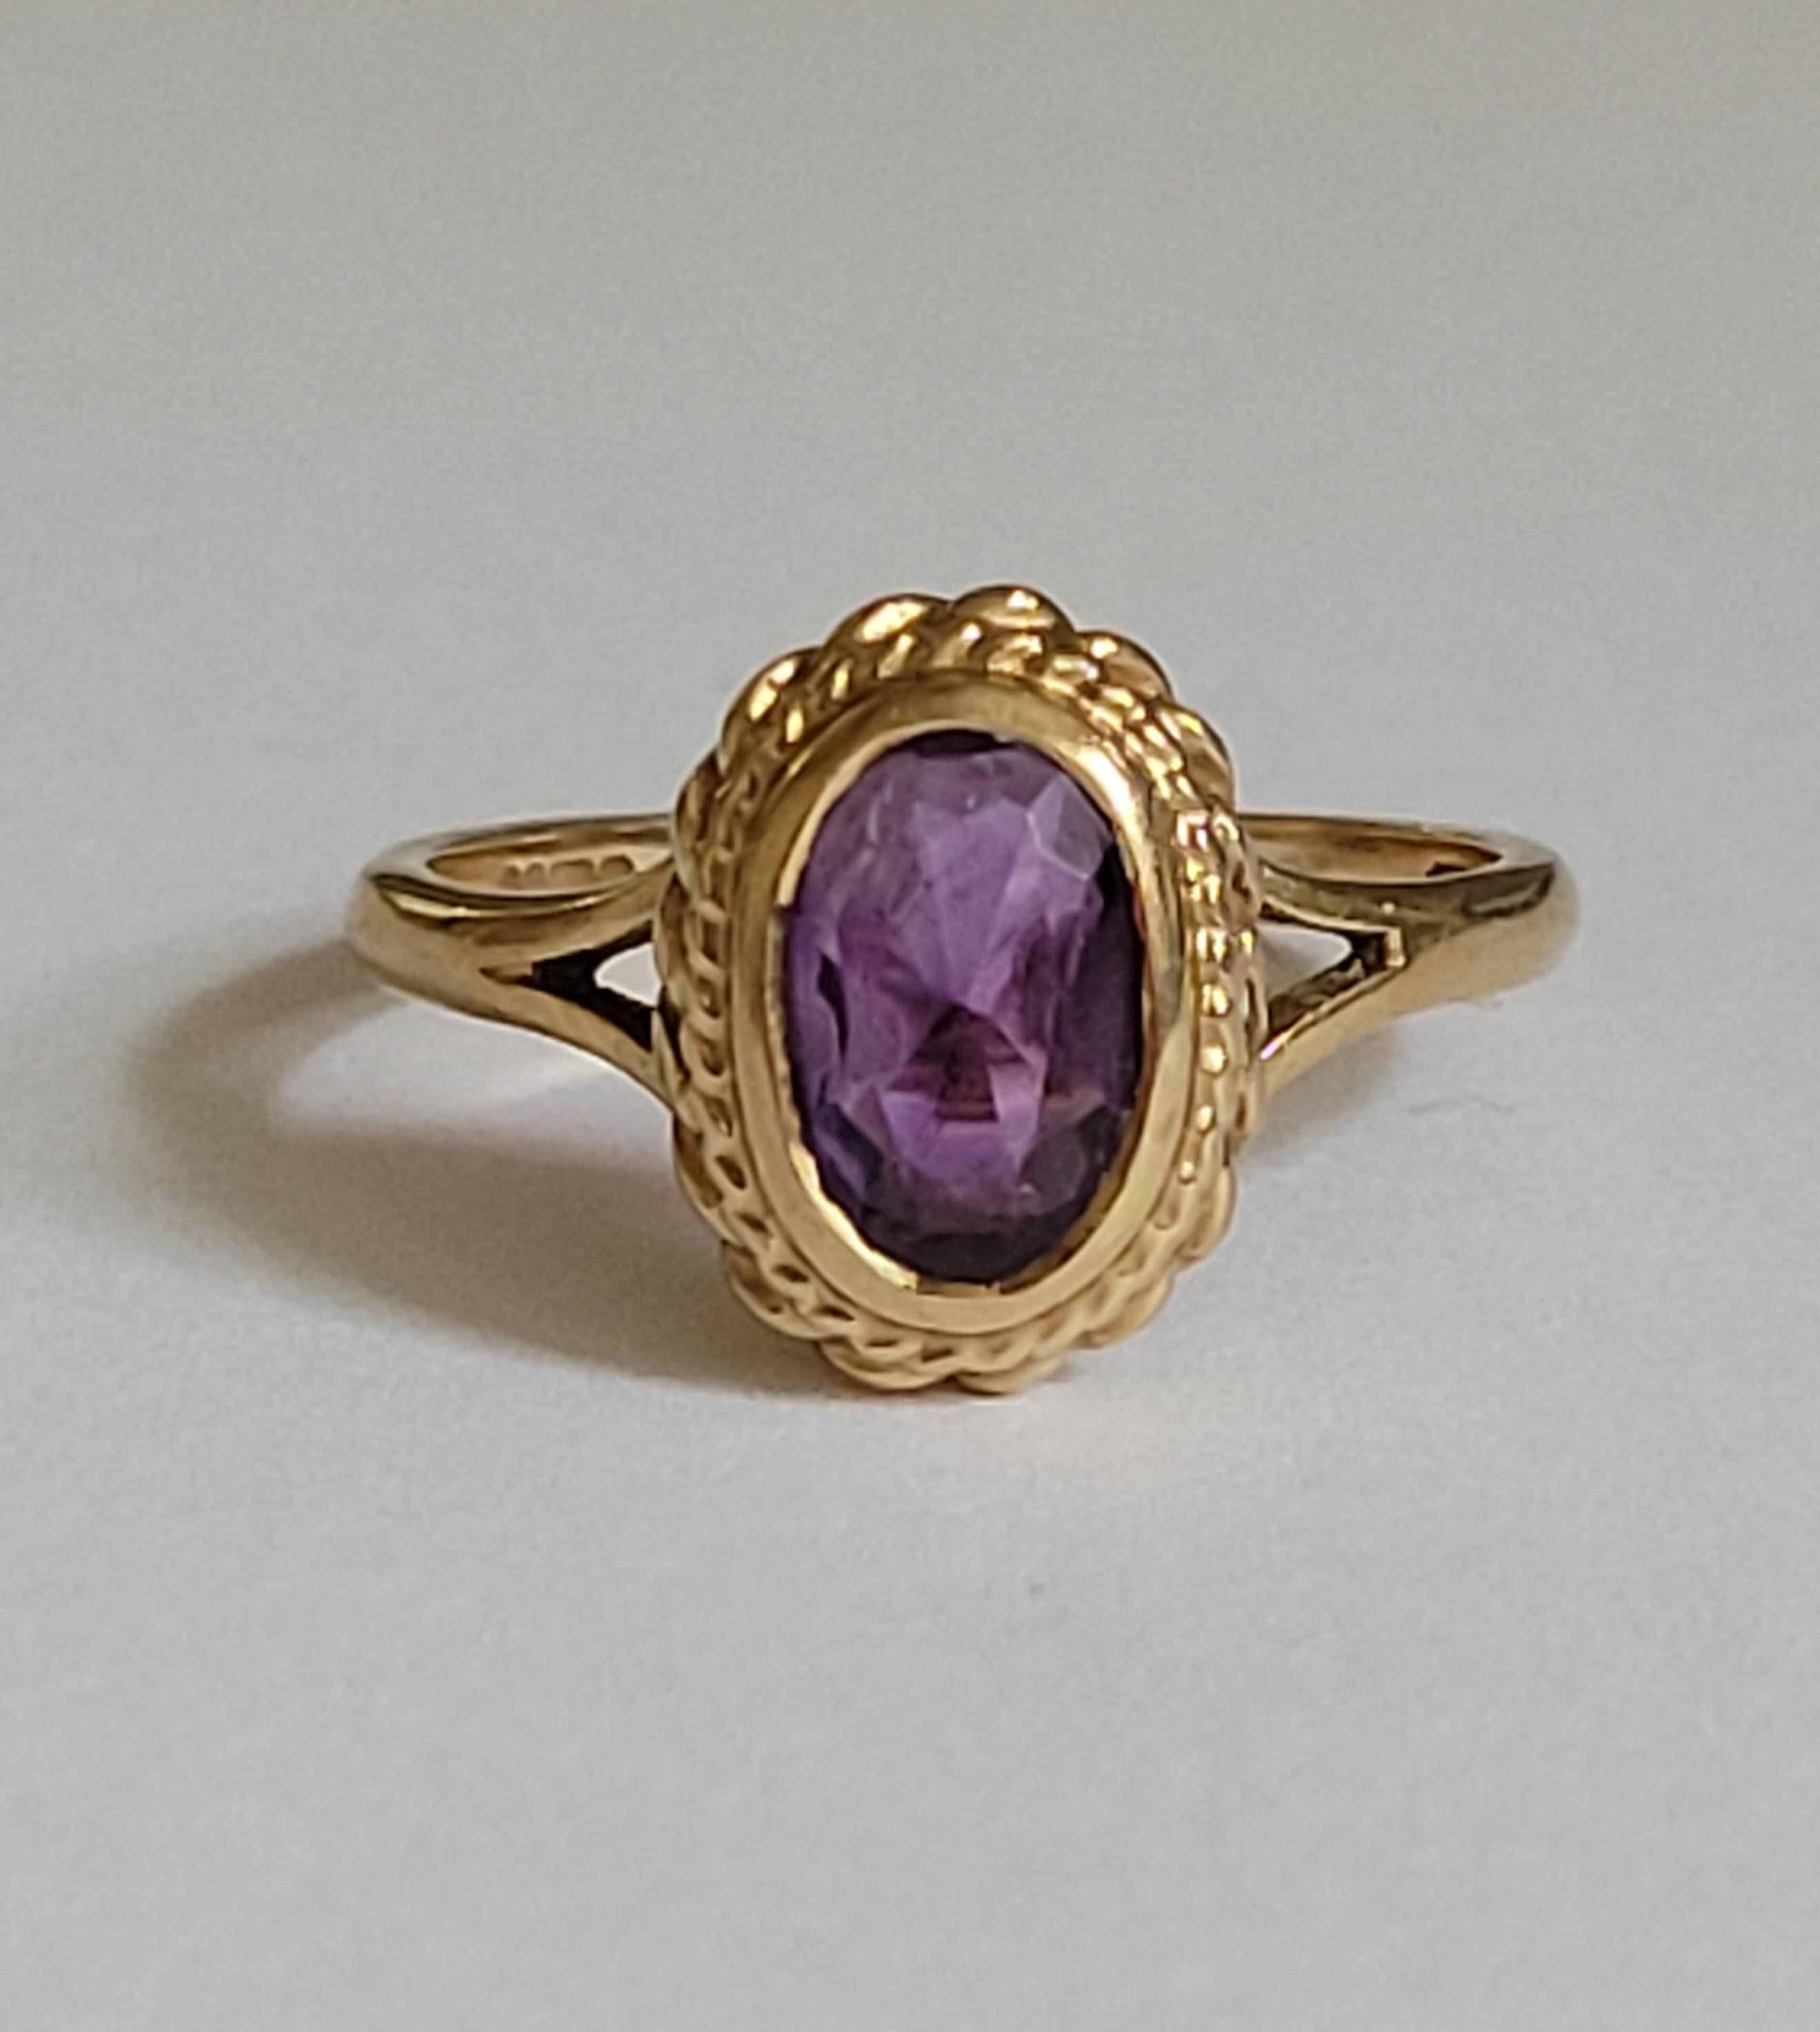 A Vintage c.1997 9 Carat Gold and natural Amethyst ring. Ring well solid made, Amethyst in rub over setting and perfect as everyday ring. Perfect gift for her. English origin.
Amethyst symbolize deep love, happiness, humility, sincerity, and